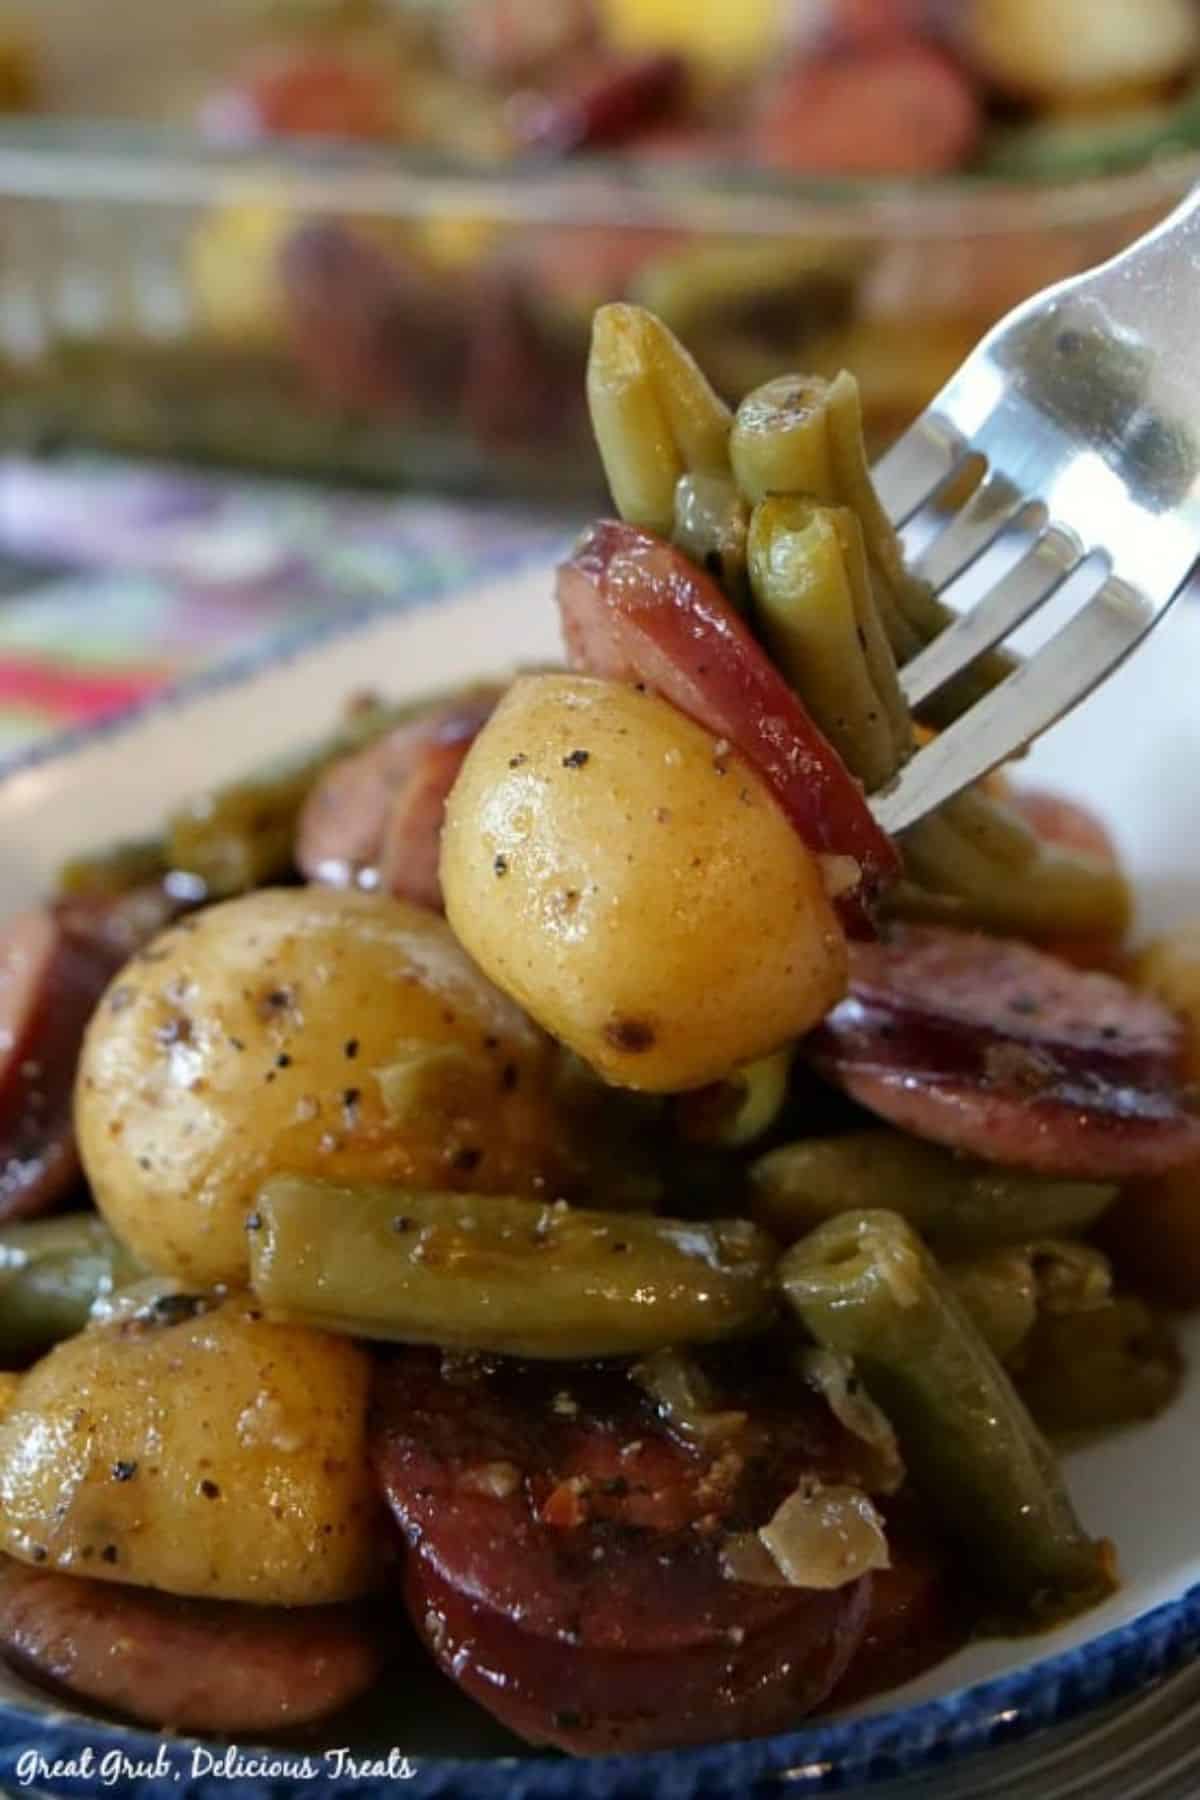 Juicy sausagem green beans and potatoes picked by a fork.